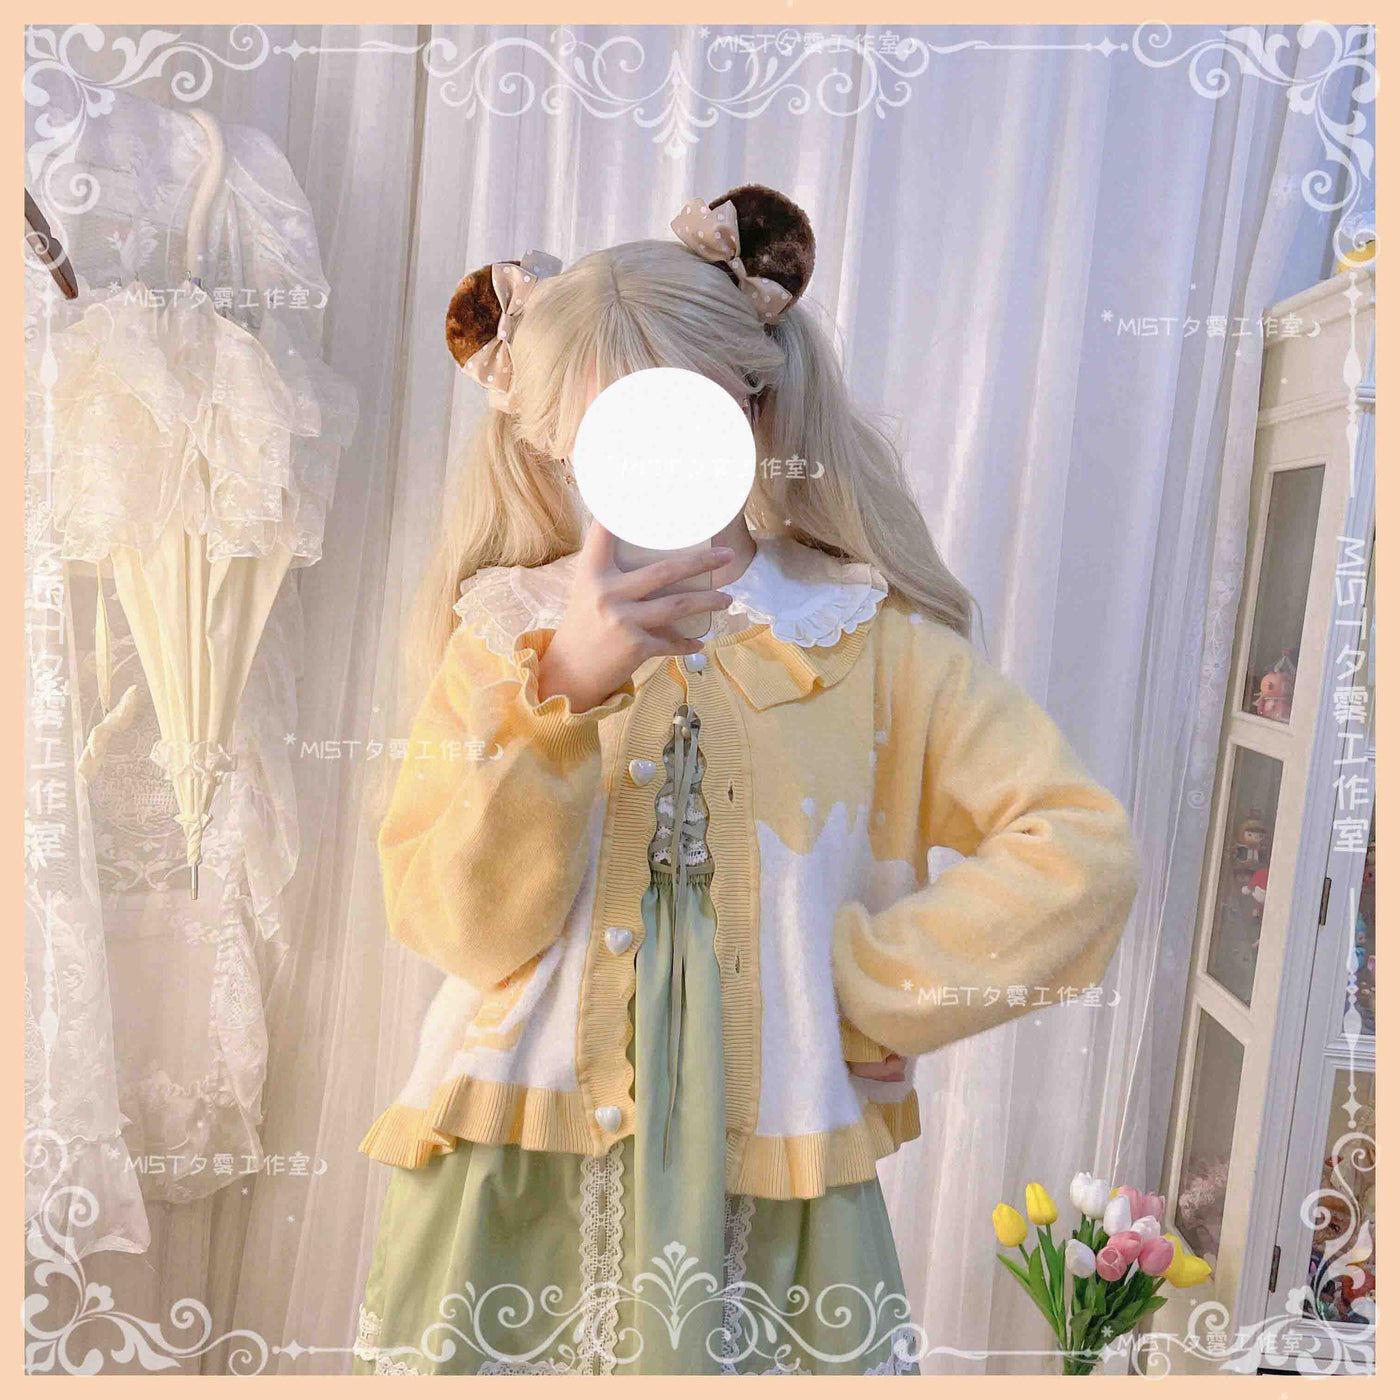 MIST~Beating Heart~Sweet Lolita Thick Sweater Coat Puff Sleeve S butter yellow 